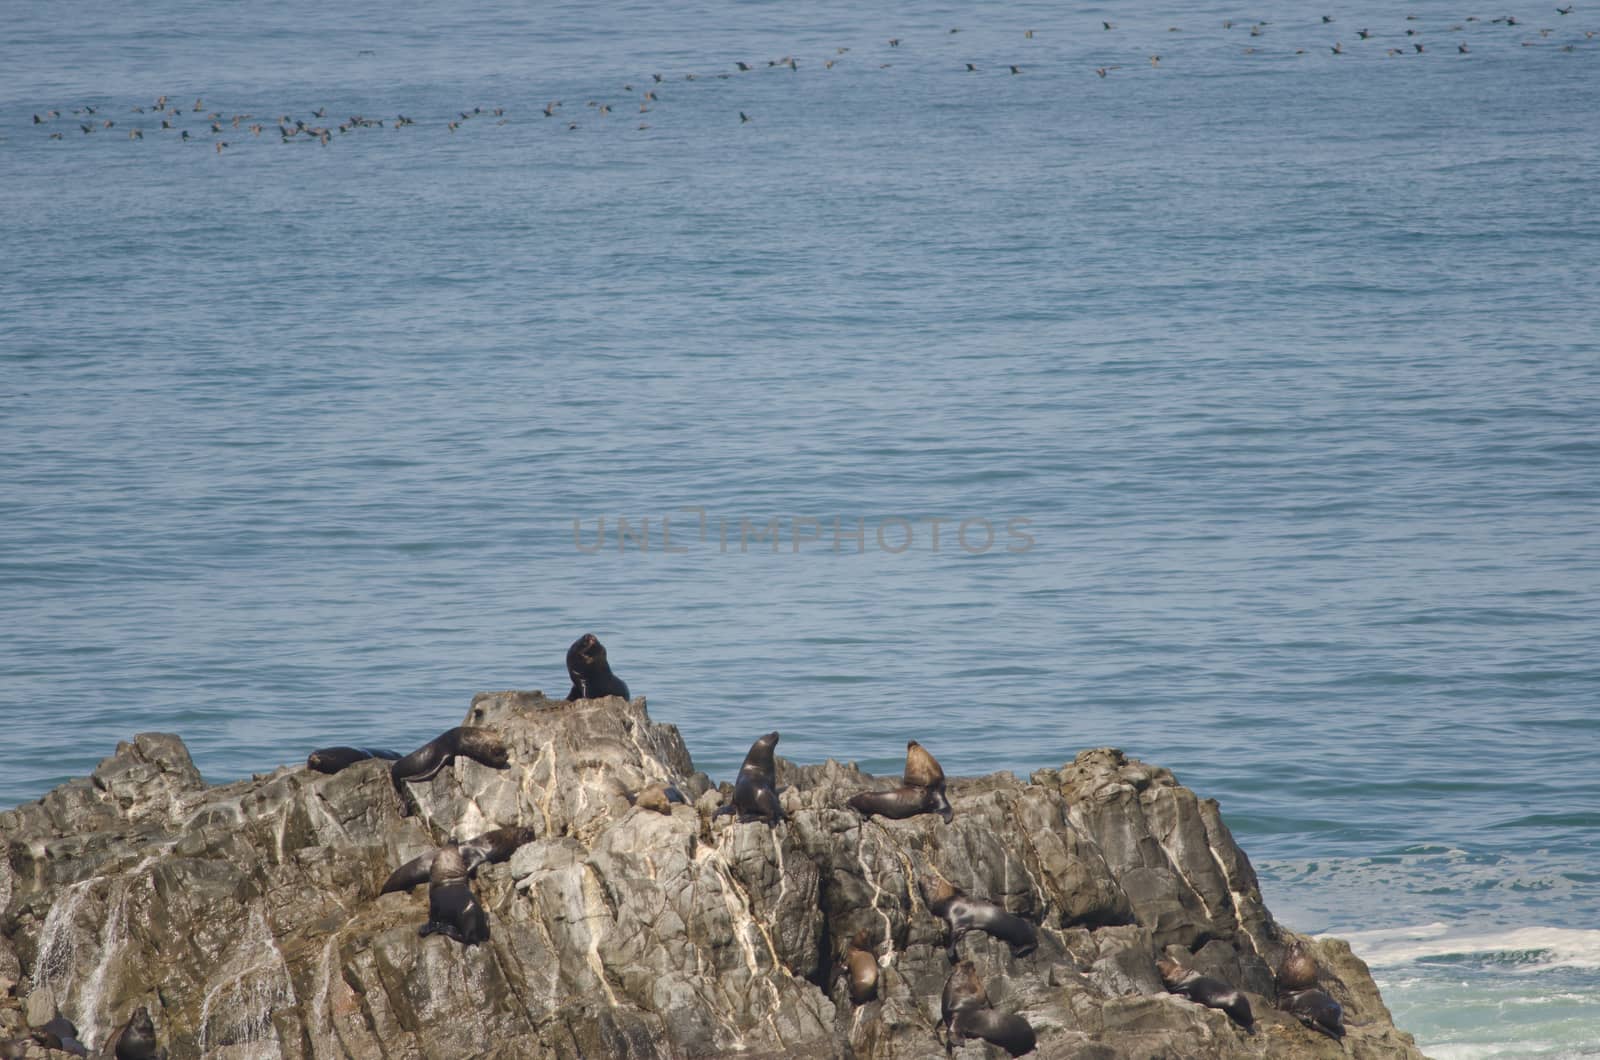 South American sea lions and guanay cormorants in the background. by VictorSuarez